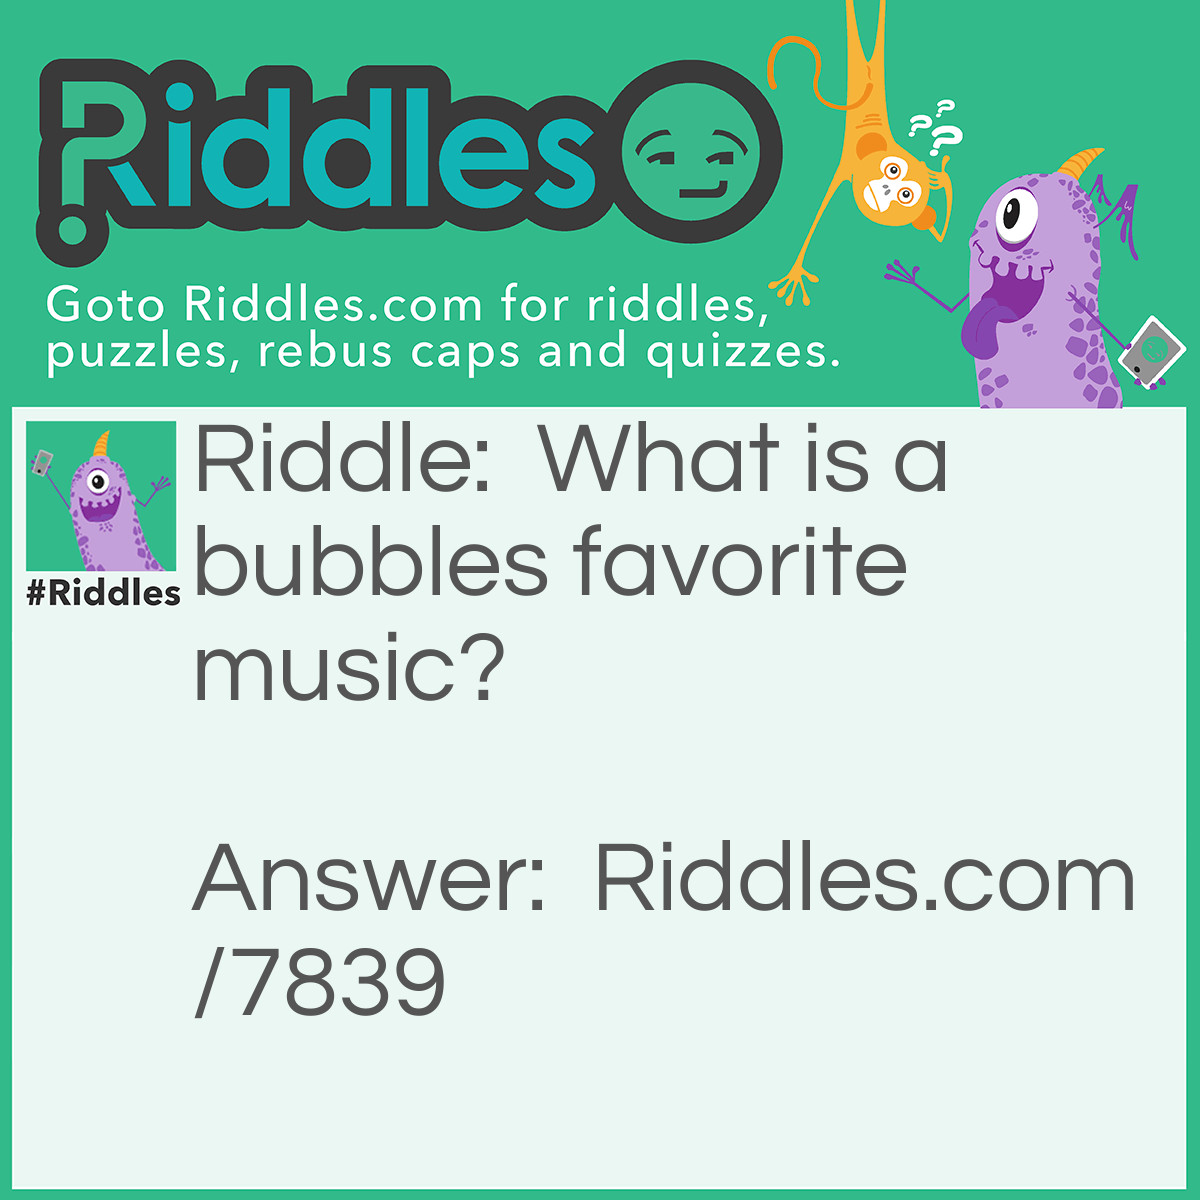 Riddle: What is a bubbles favorite music? Answer: Pop music.